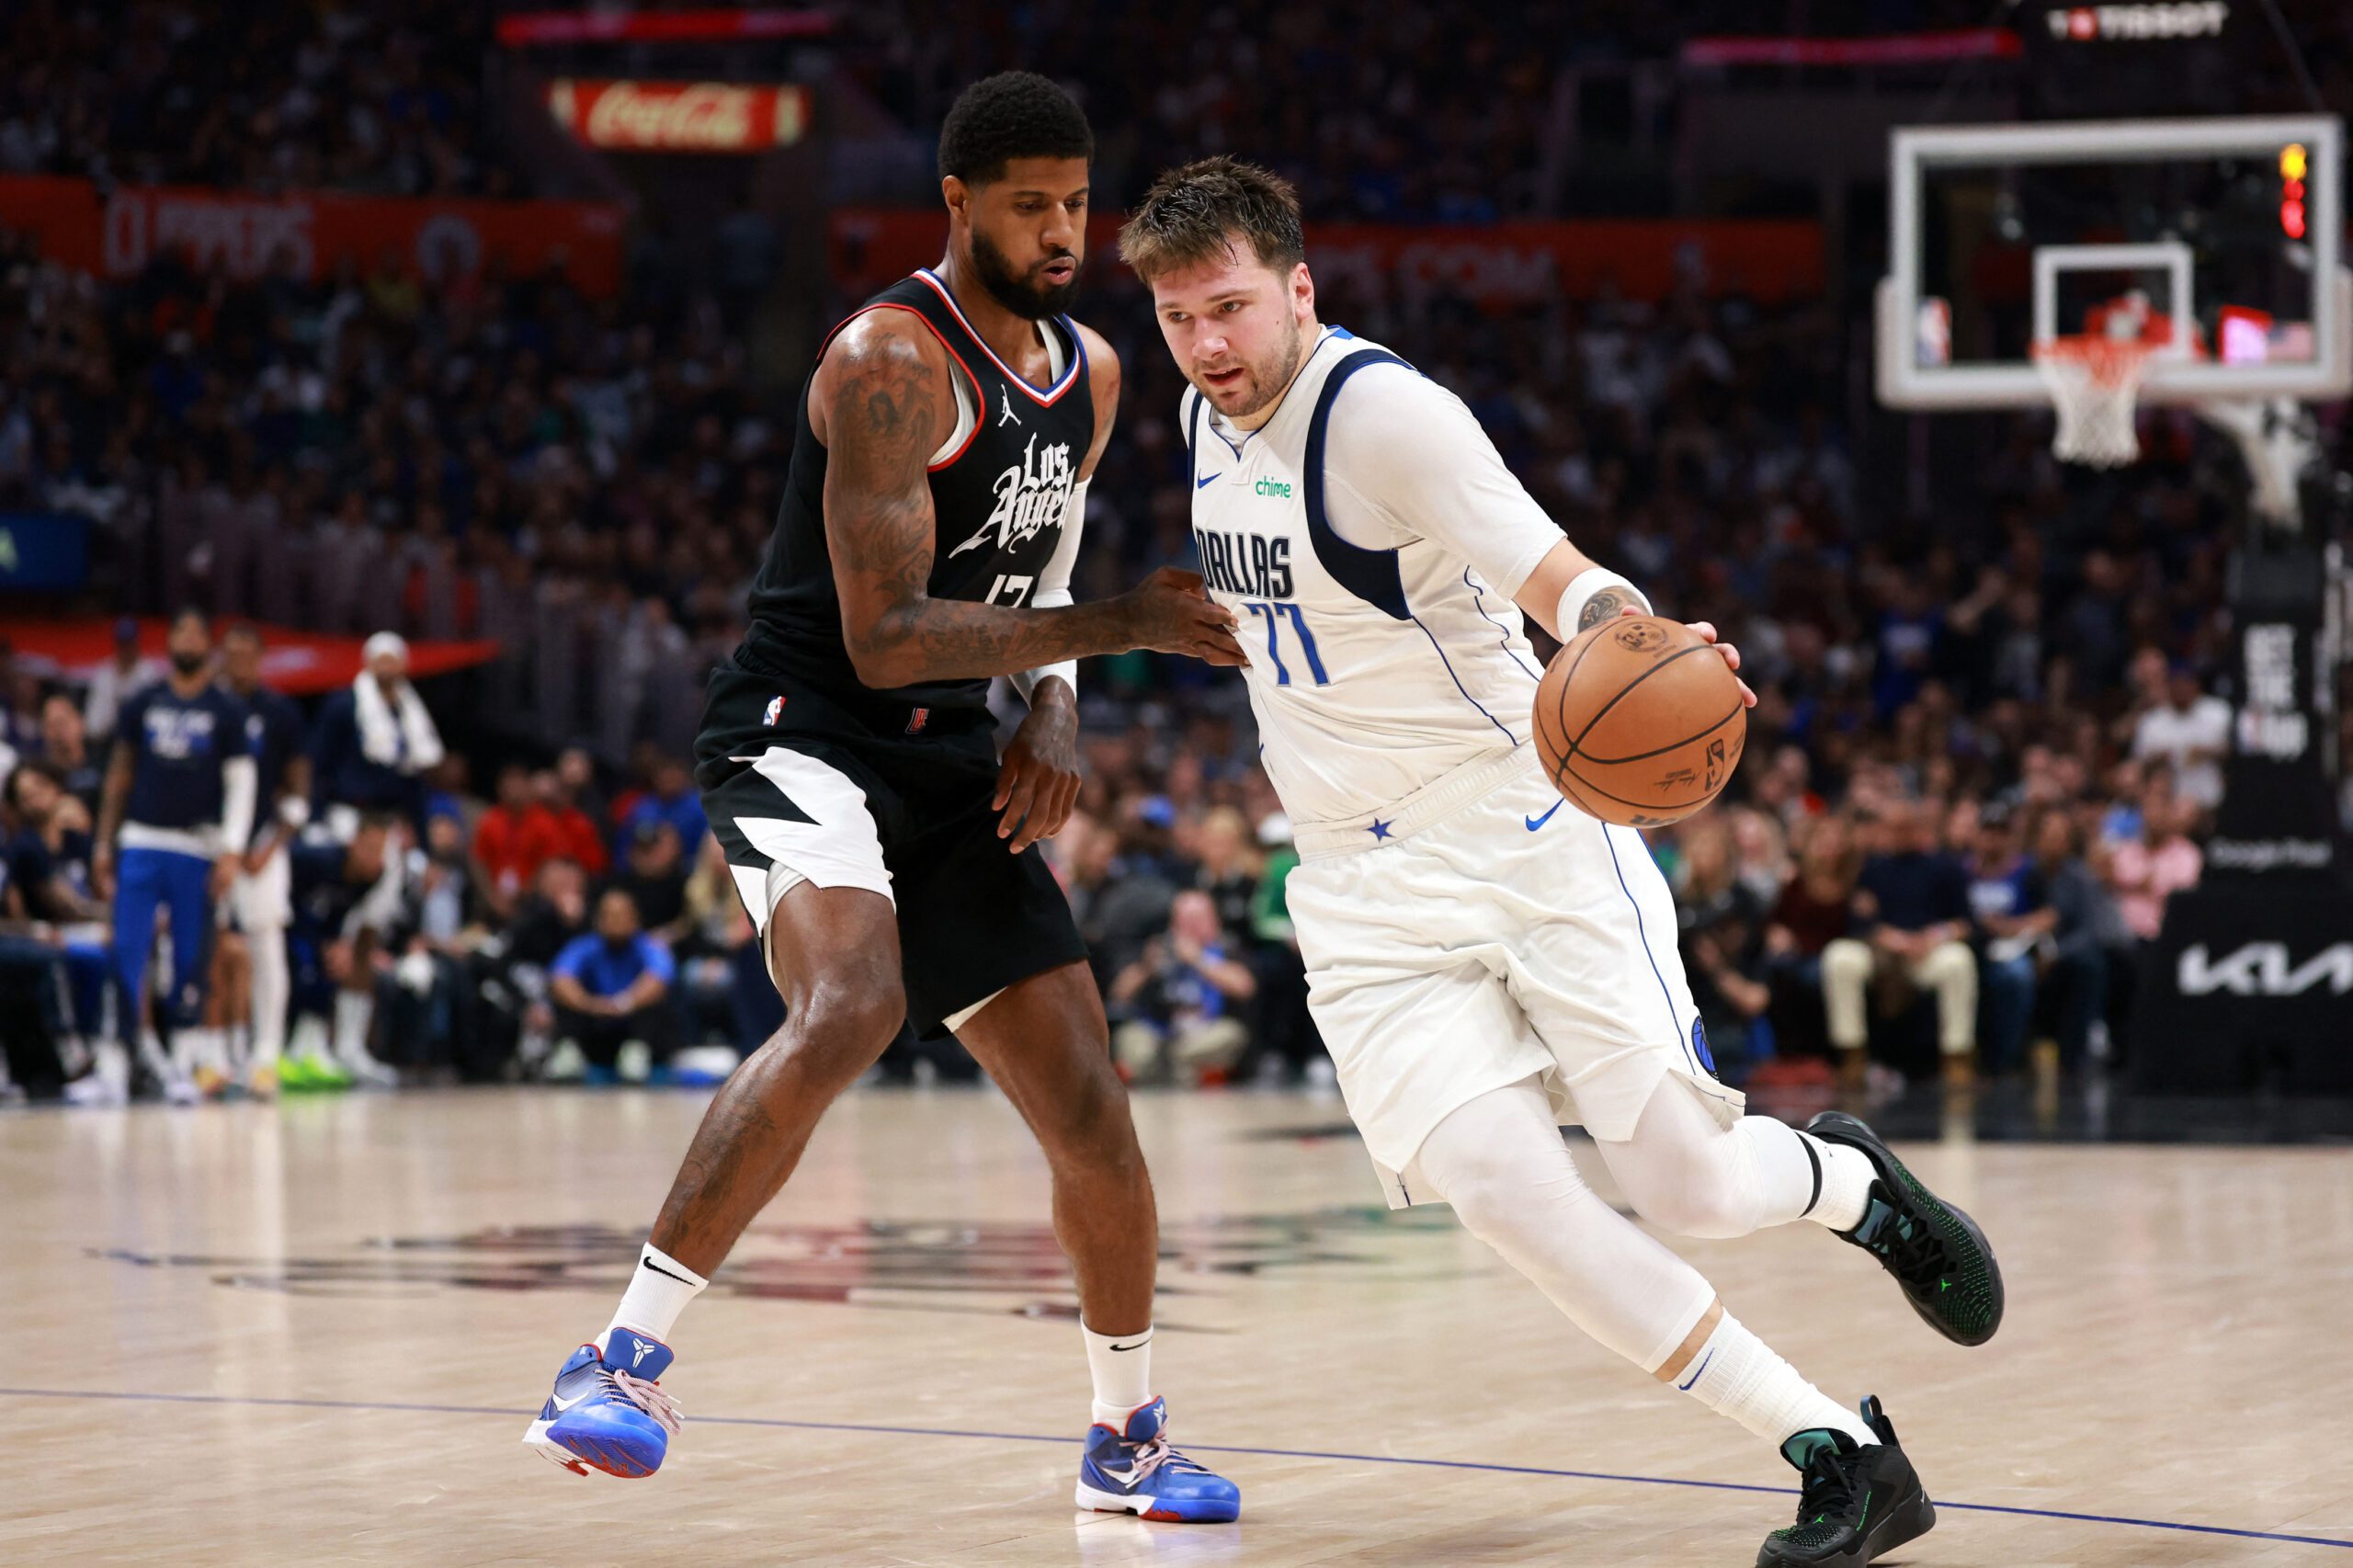 Cold-blooded Luka Doncic helps Mavericks even series vs Clippers